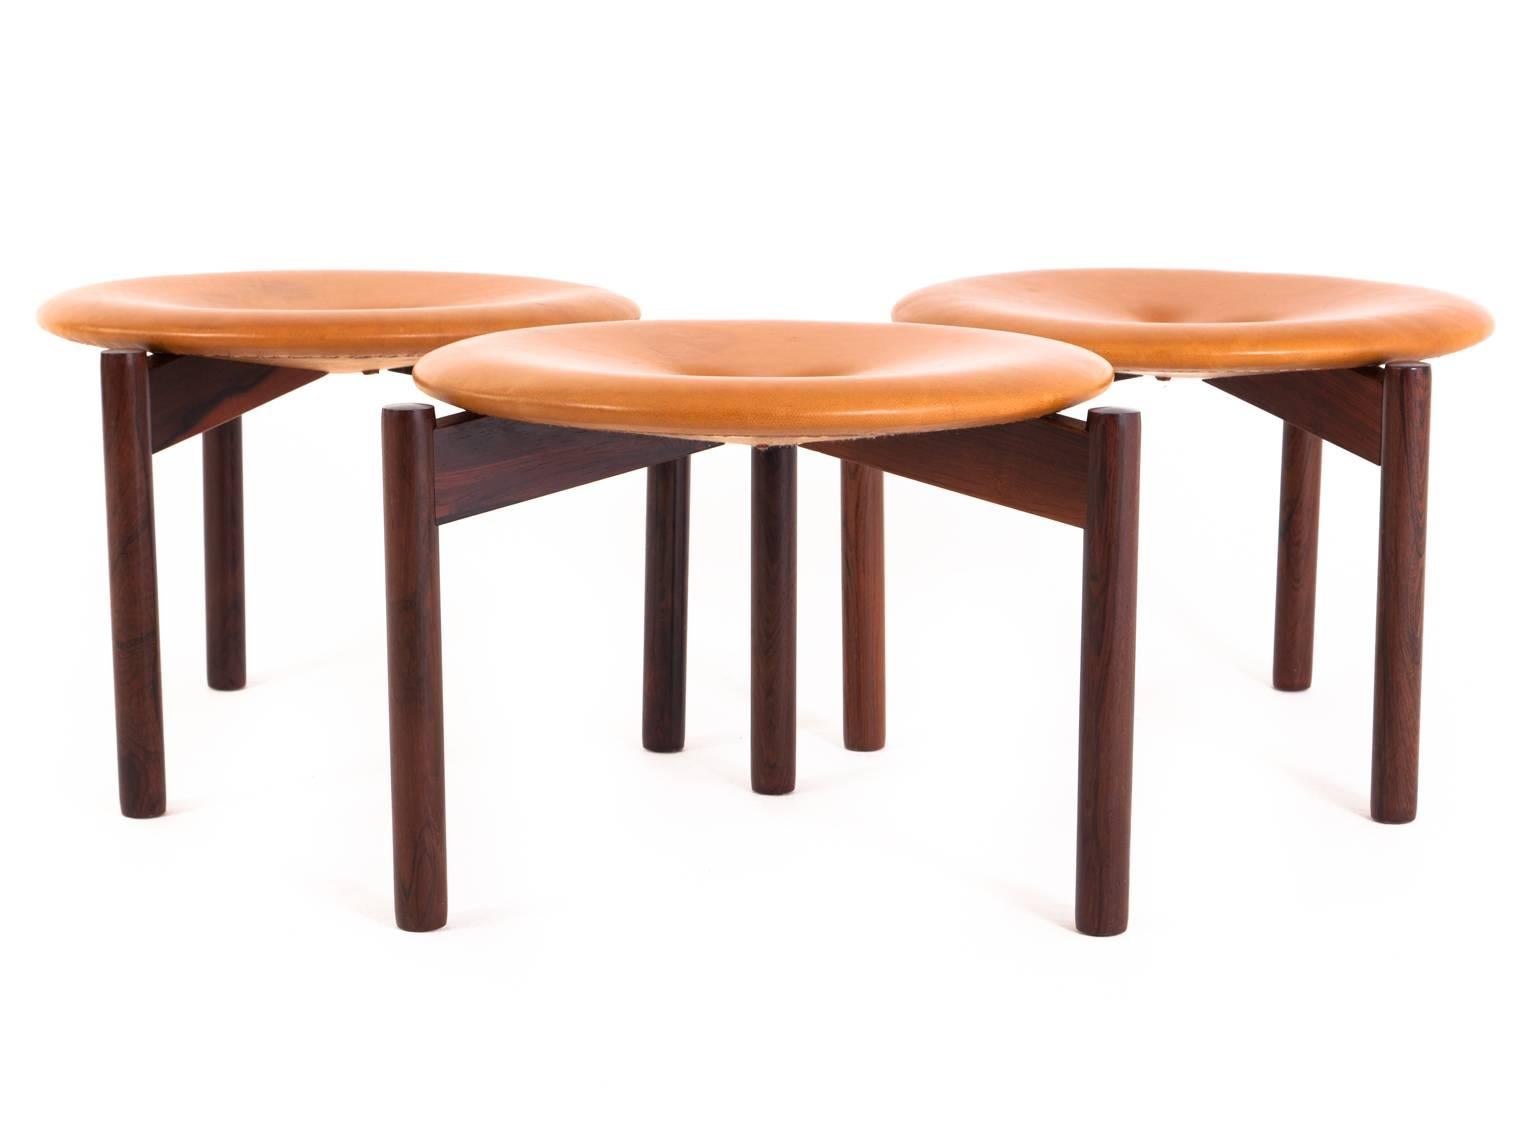 Uno & Östen Kristiansson

Set of three stools in rosewood and patinated leather

Designed by Uno & Östen Kristiansson
Produced by Luxus, Vittsjø


Pall, formgiven av Uno & Östen Kristiansson, 1960-tal. I palisander med sits i skinn.